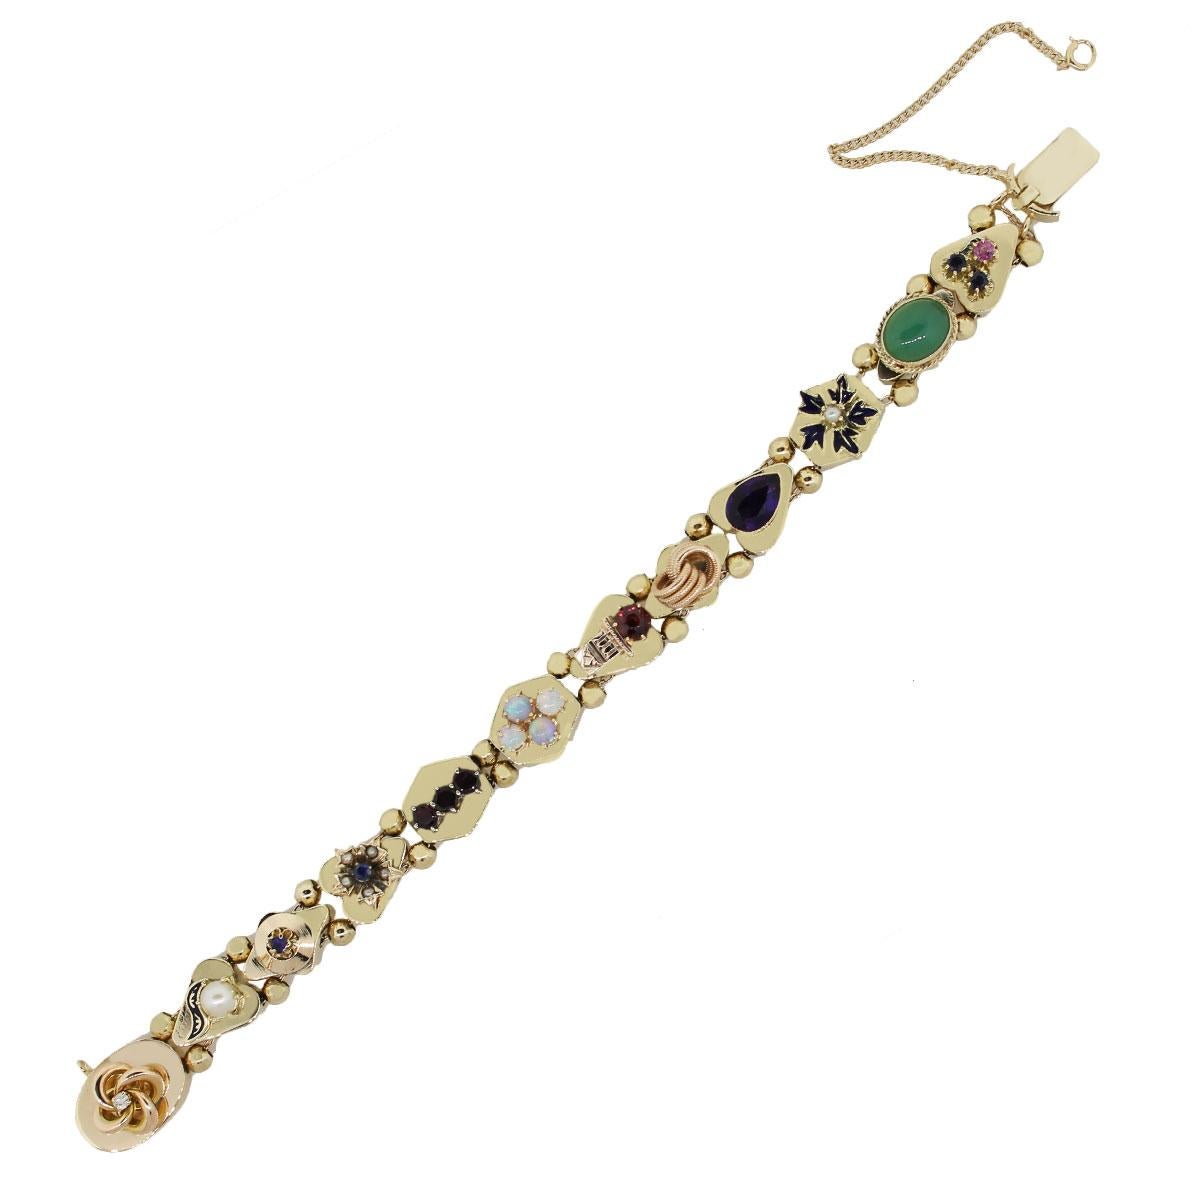 Material: 14k yellow gold
Clasp: Tongue in box with spring ring safety
Gemstone details: Pear shape Amethyst, Opals, Ruby, Rubelite, Pink Sapphire, Blue Sapphire, Enamel, Pearl
Measurement: 7.5